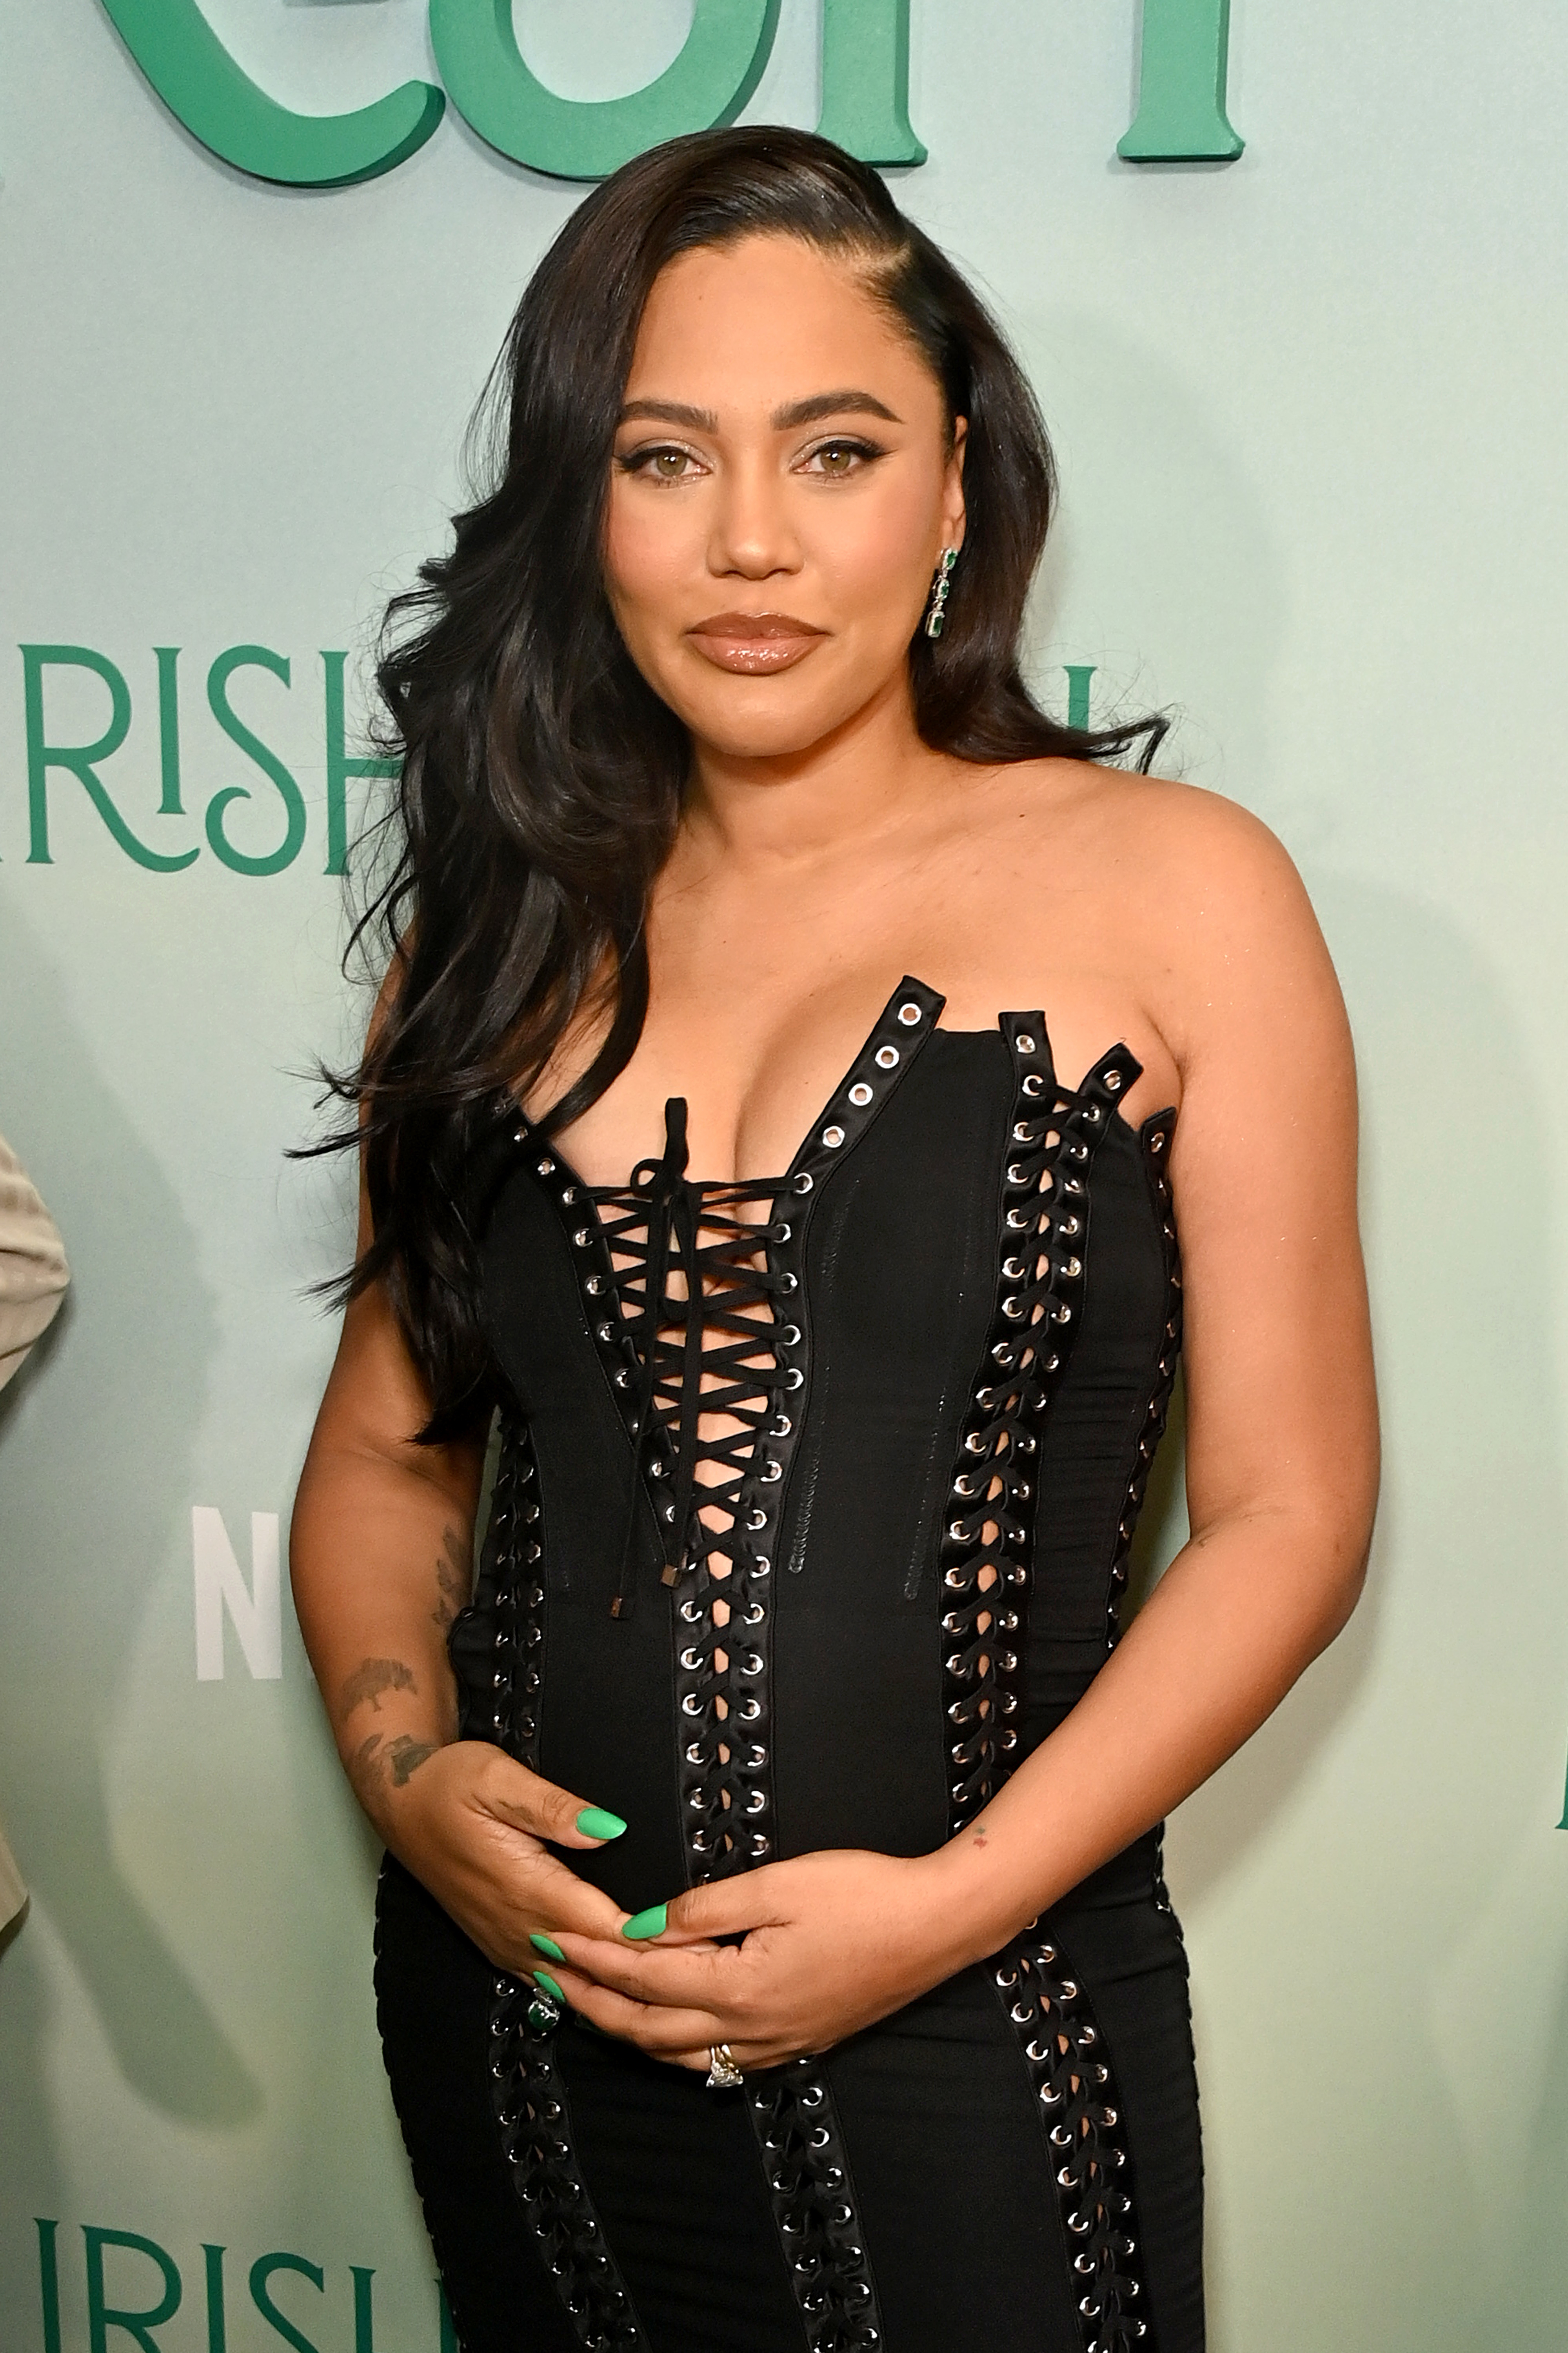 Ayesha in a black studded corset dress posing with hand on hip